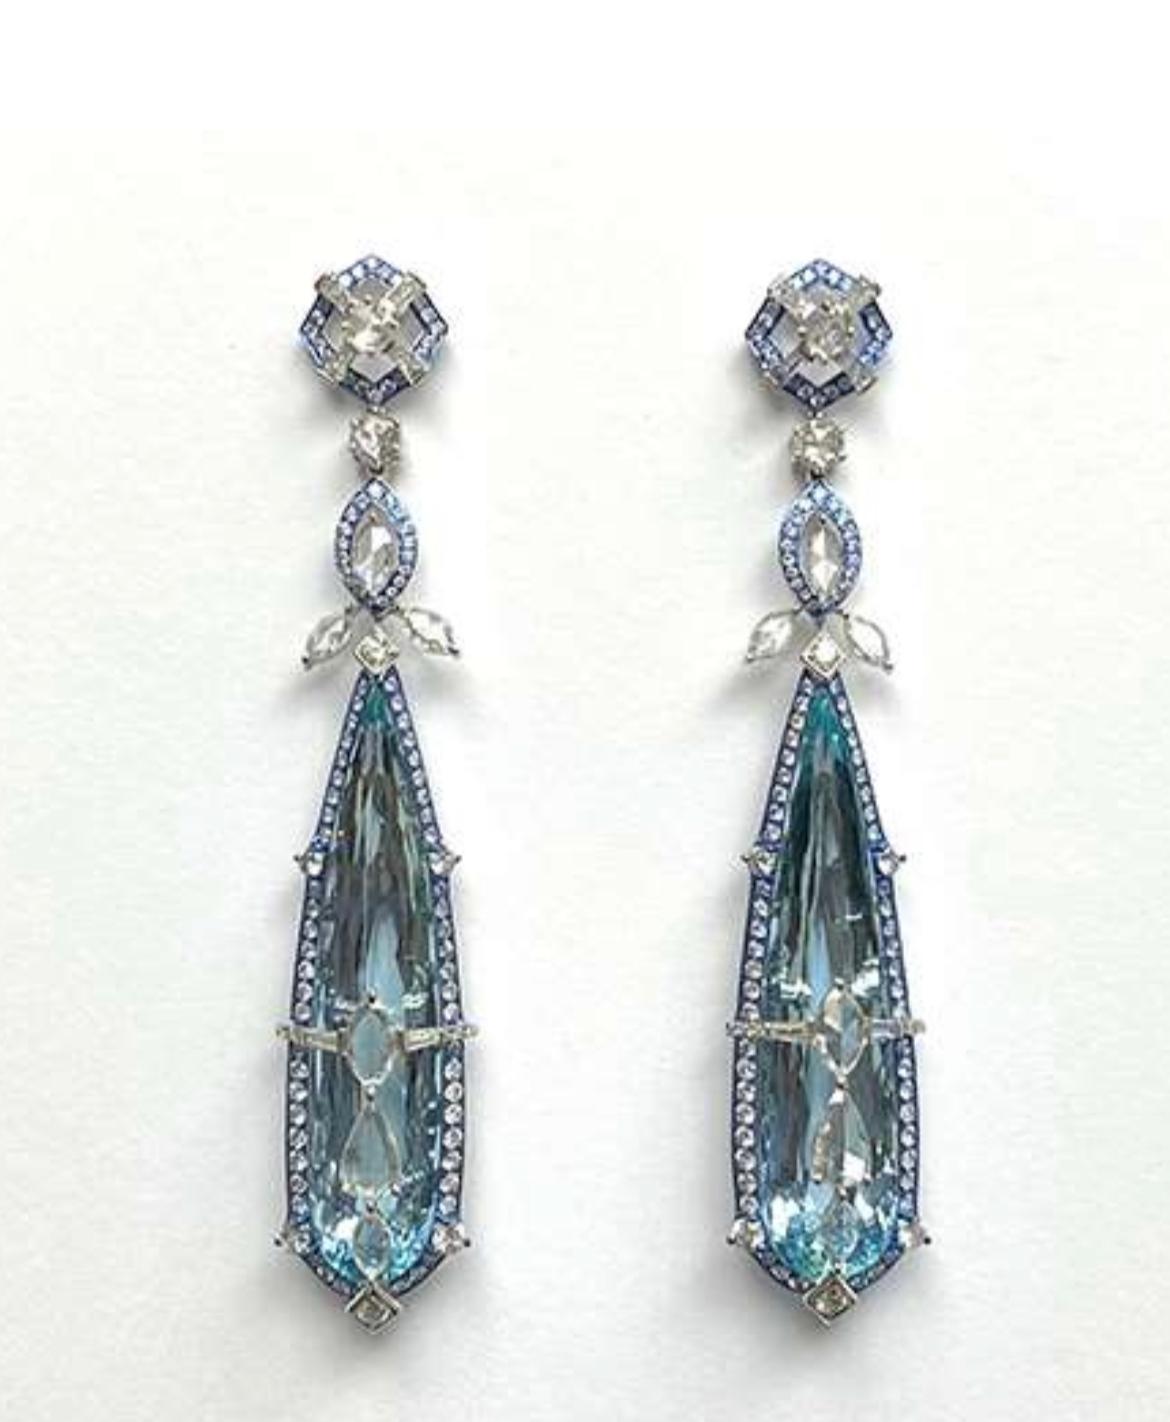 The Following Items we are offering are a Rare Important Pair of Spectacular and Beautiful IMPORTANT & EXQUISITE 18KT Gold with Platinum Large Gorgeous Aquamarine and Rose Cut, Trillion Diamond, Round Diamond Dangle Earrings. Earrings consists of